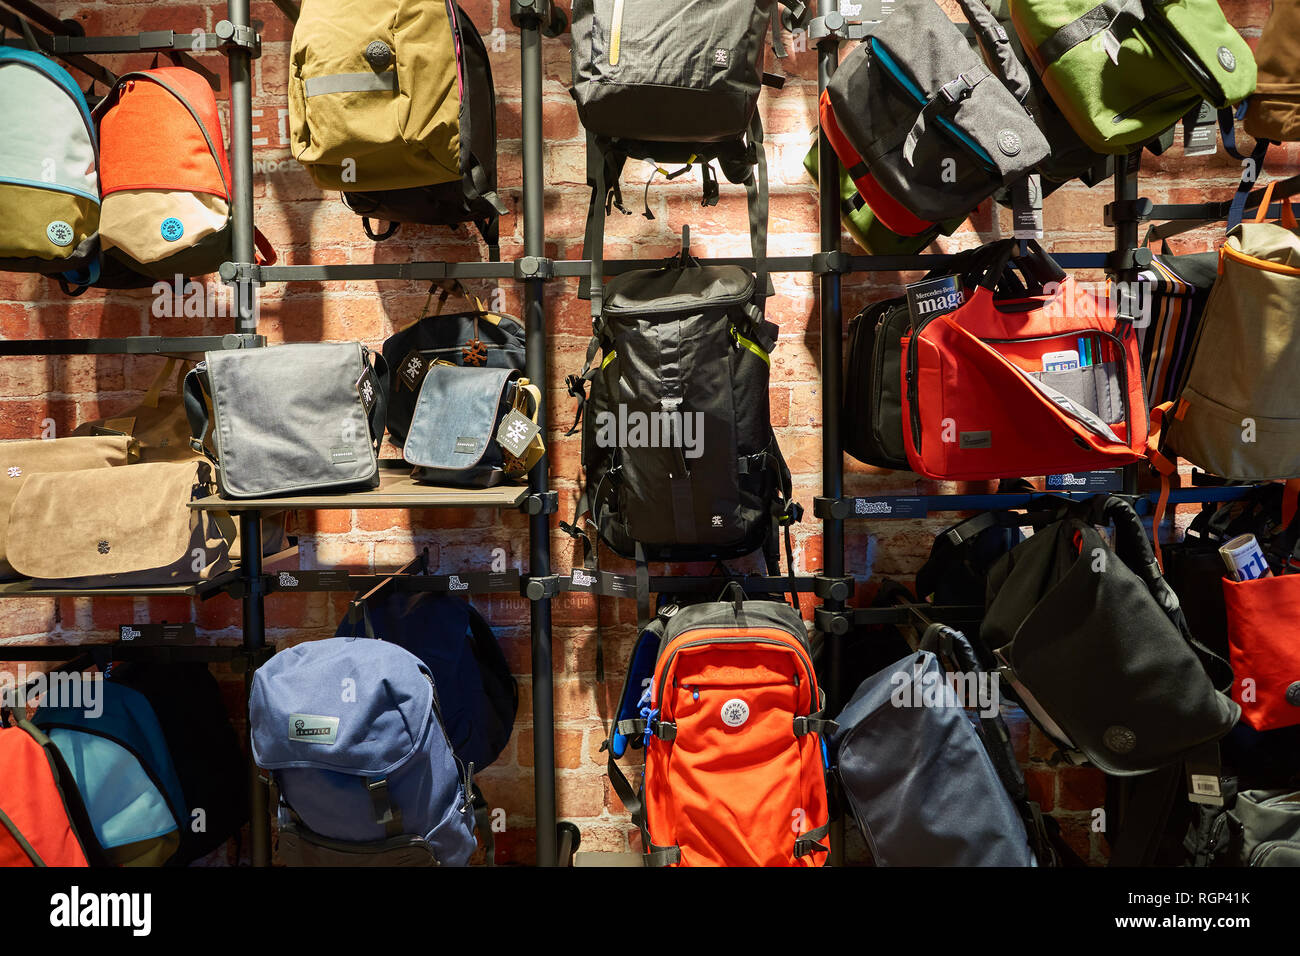 Crumpler Shop High Resolution Stock Photography and Images - Alamy